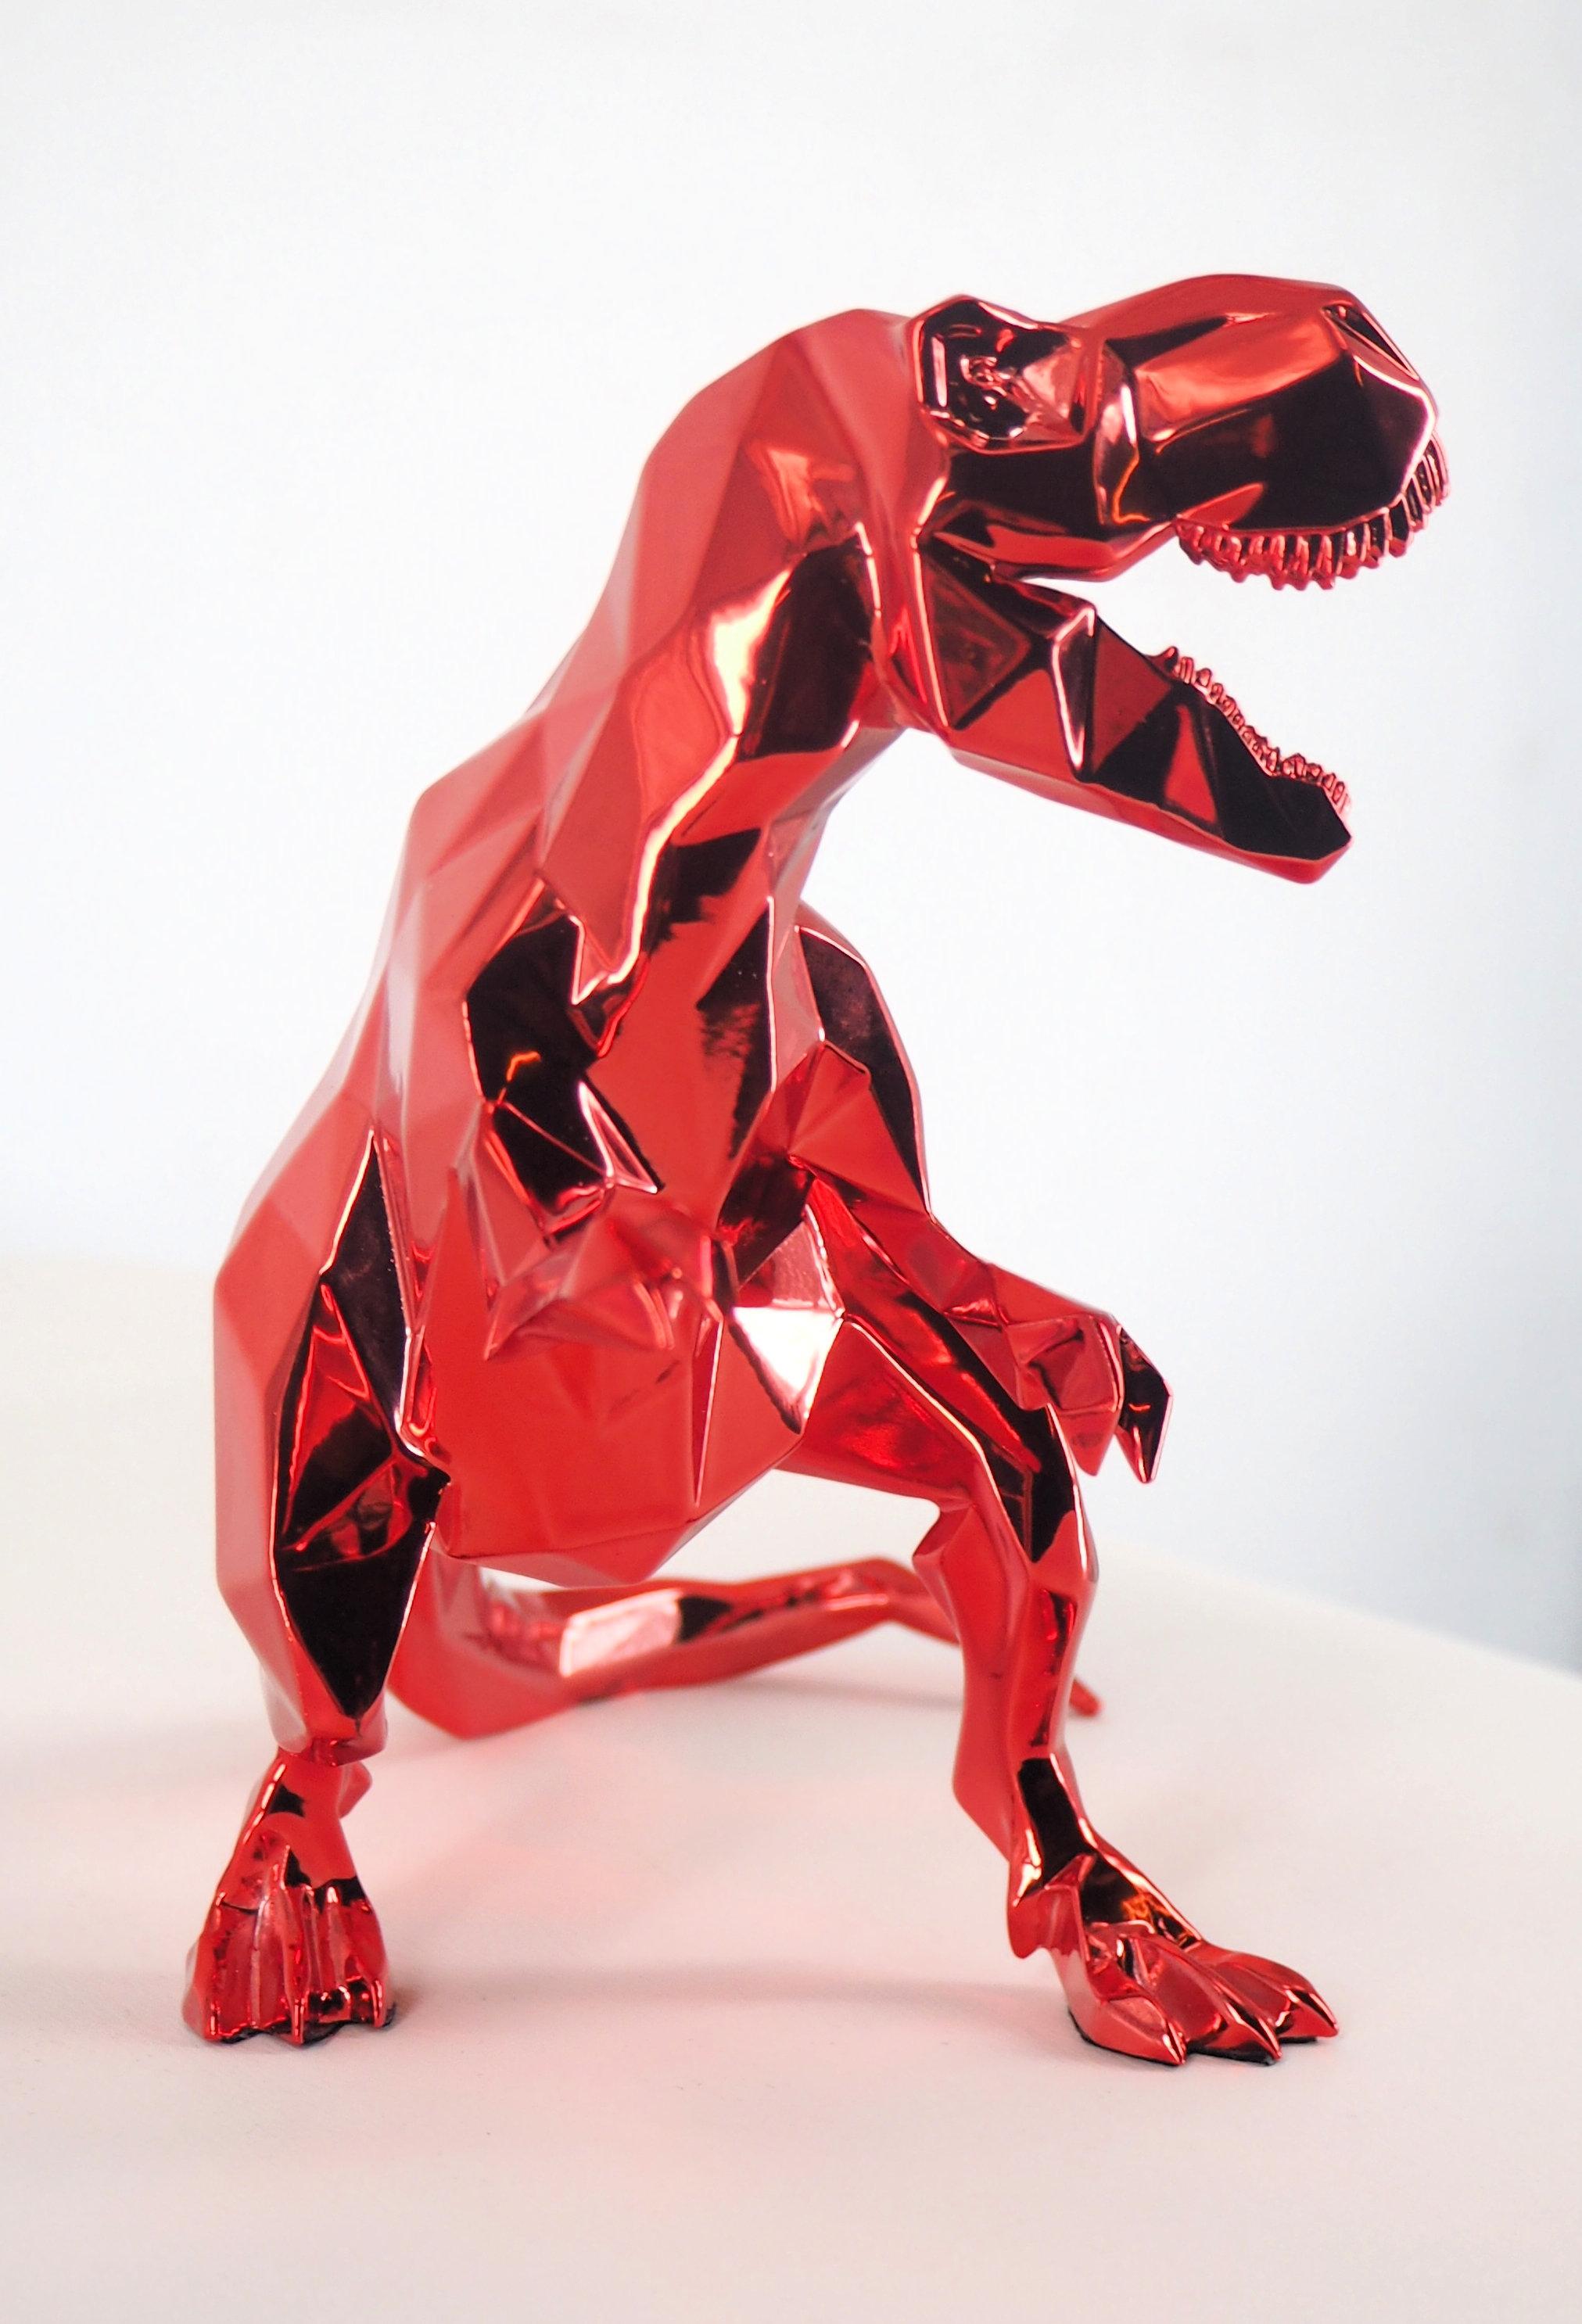 T-Rex (Red Edition) - Sculpture in original box with artist certificate For Sale 3